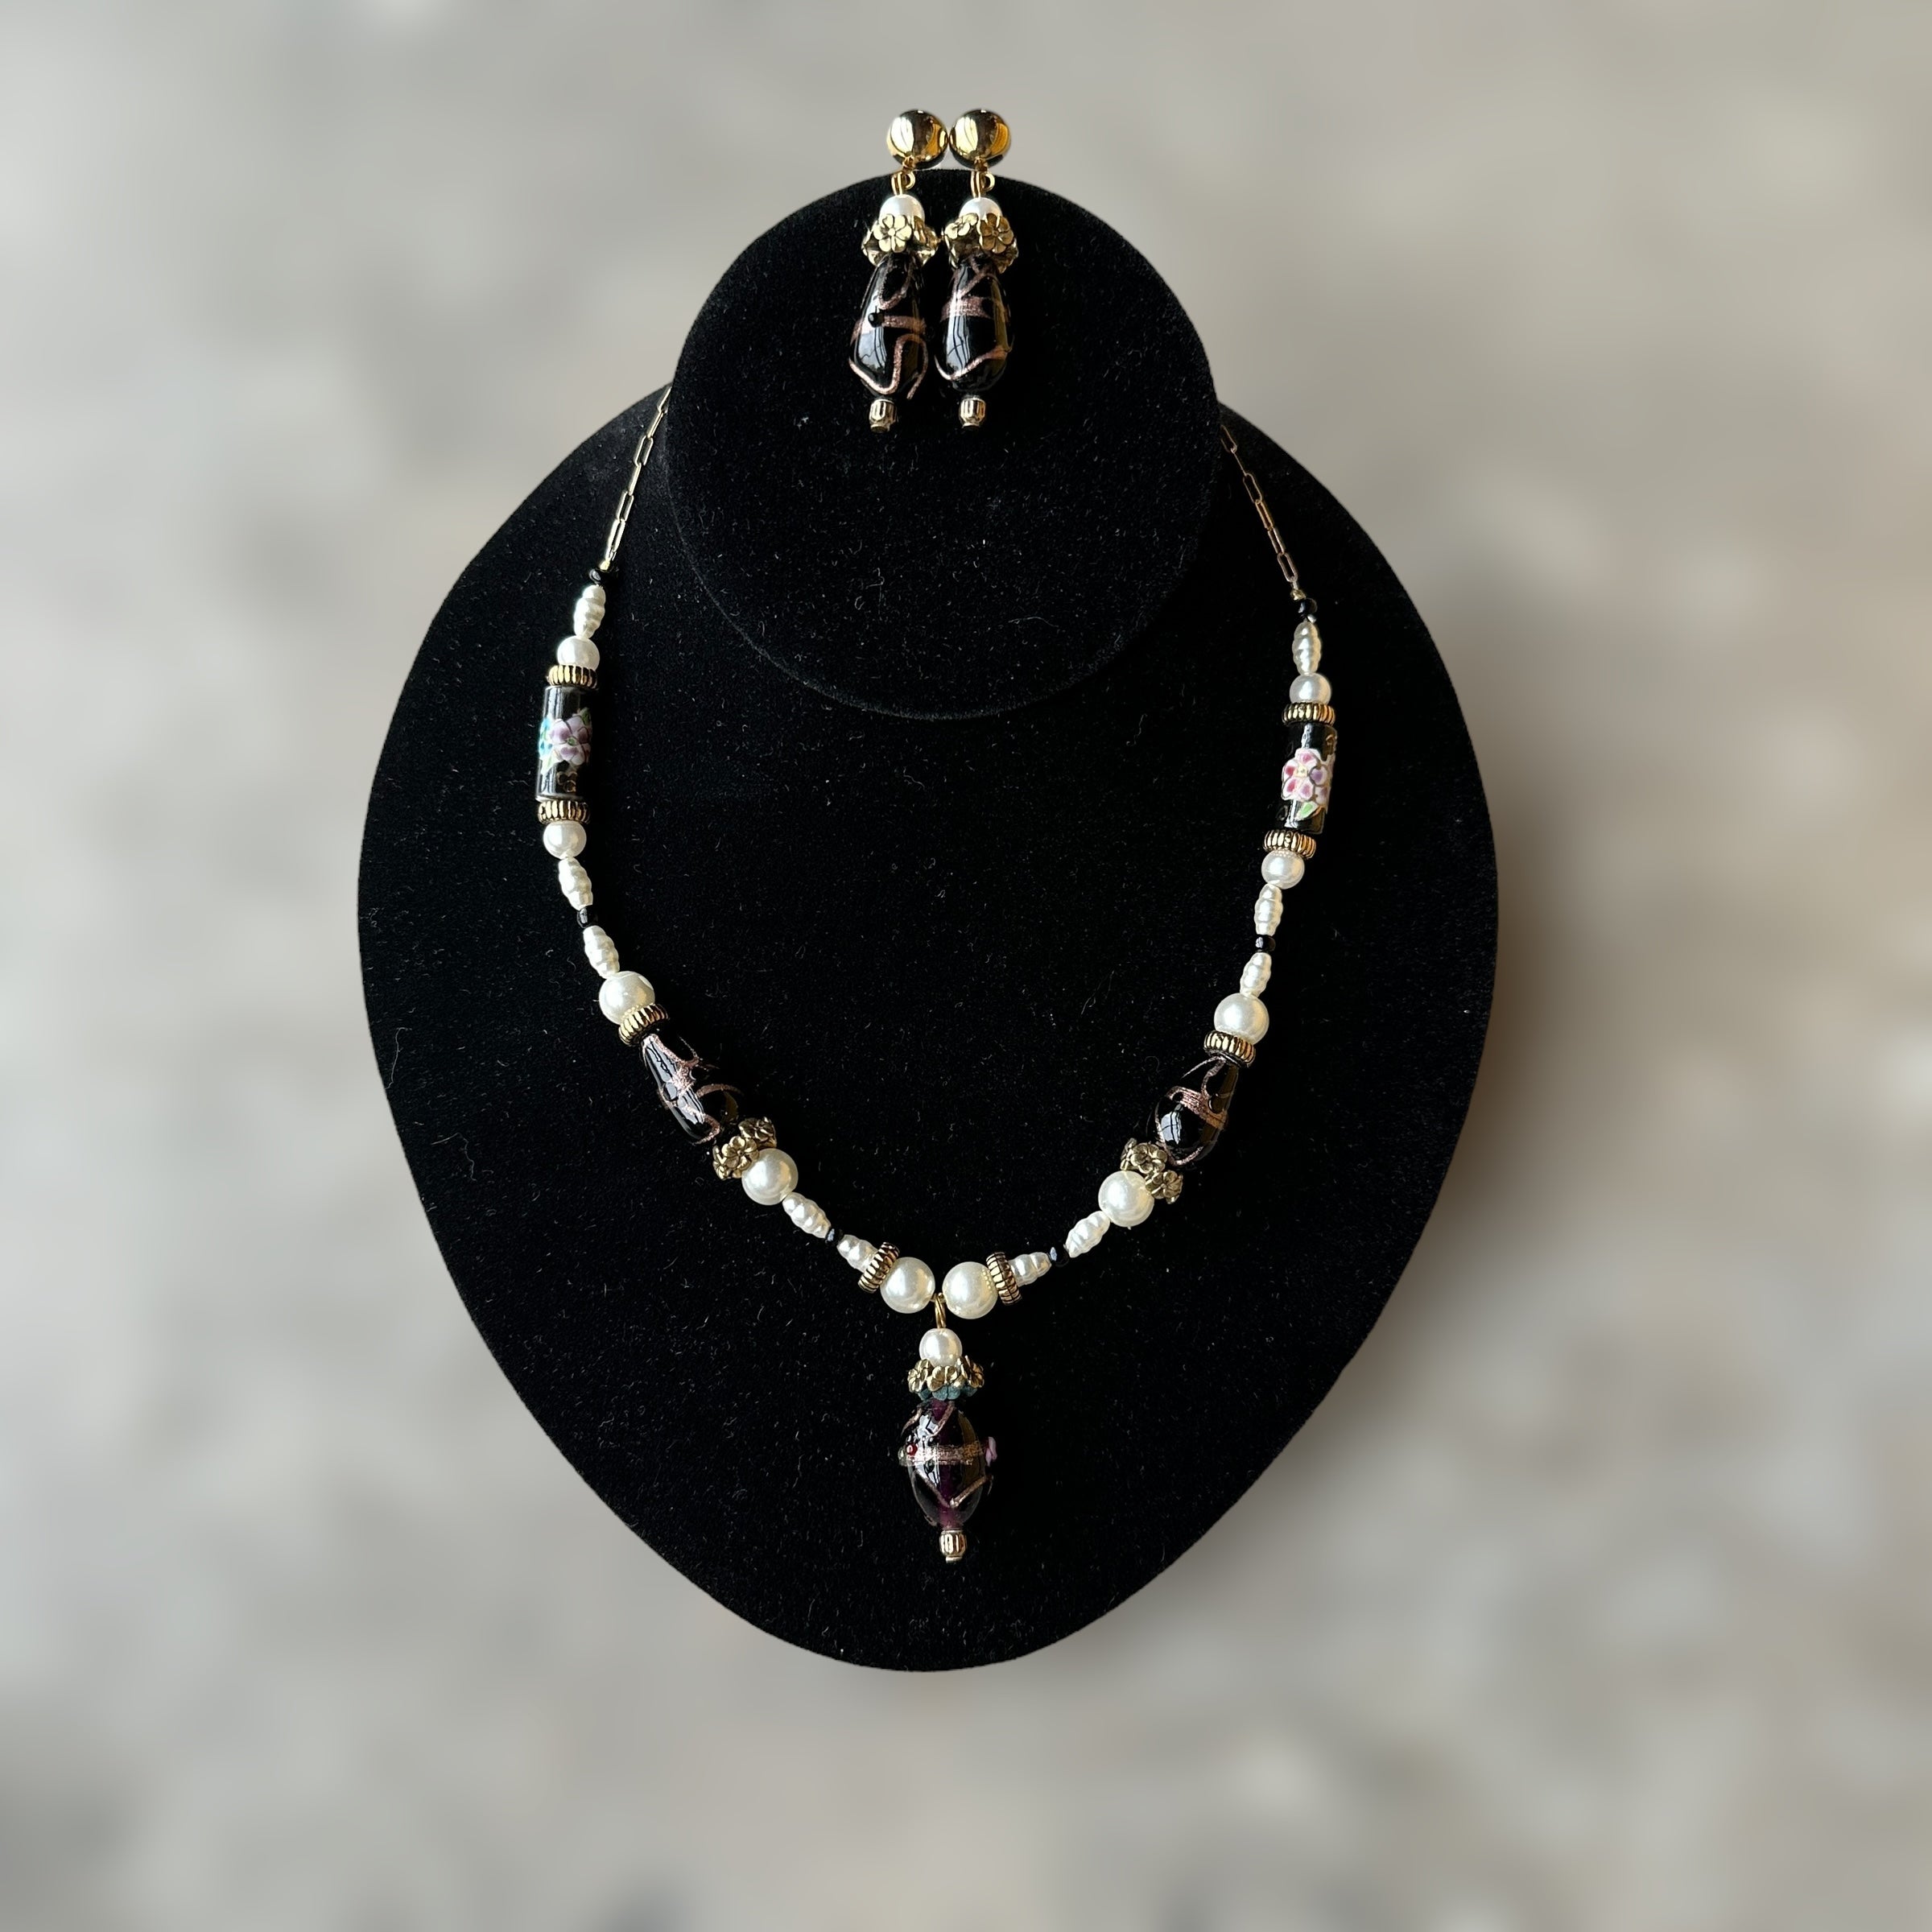 vintage gold-tone and necklace and earring set with black glass and faux pearl detailing